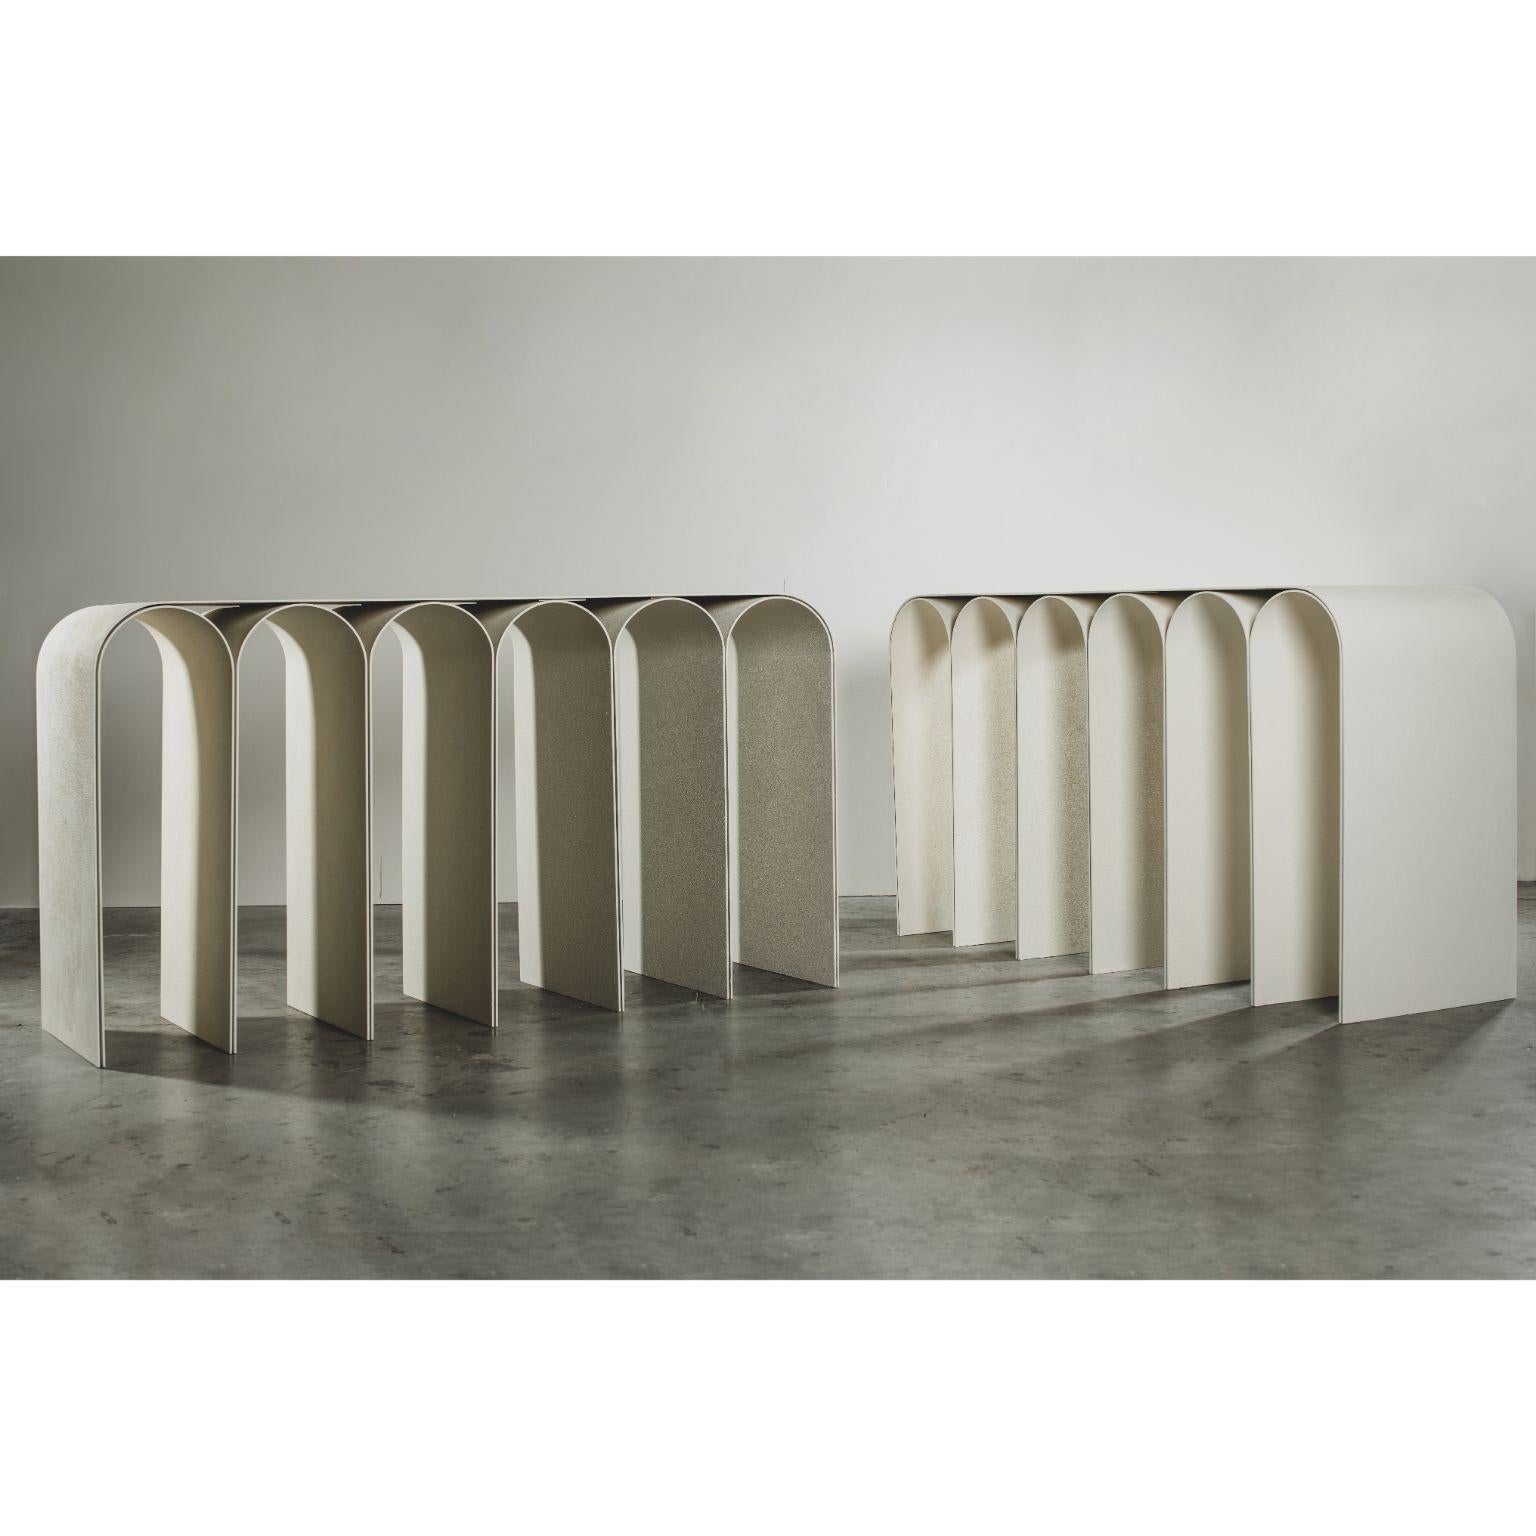 Pair of 2 white arch console by Pietro Franceschini
Sold exclusively by Galerie Philia
Dimensions: W 150 x L 47 x H 83 cm
Materials: Aluminium, white plaster

Made to order dimensions can be ordered.

Available finishes:
Steel (black, white, brass